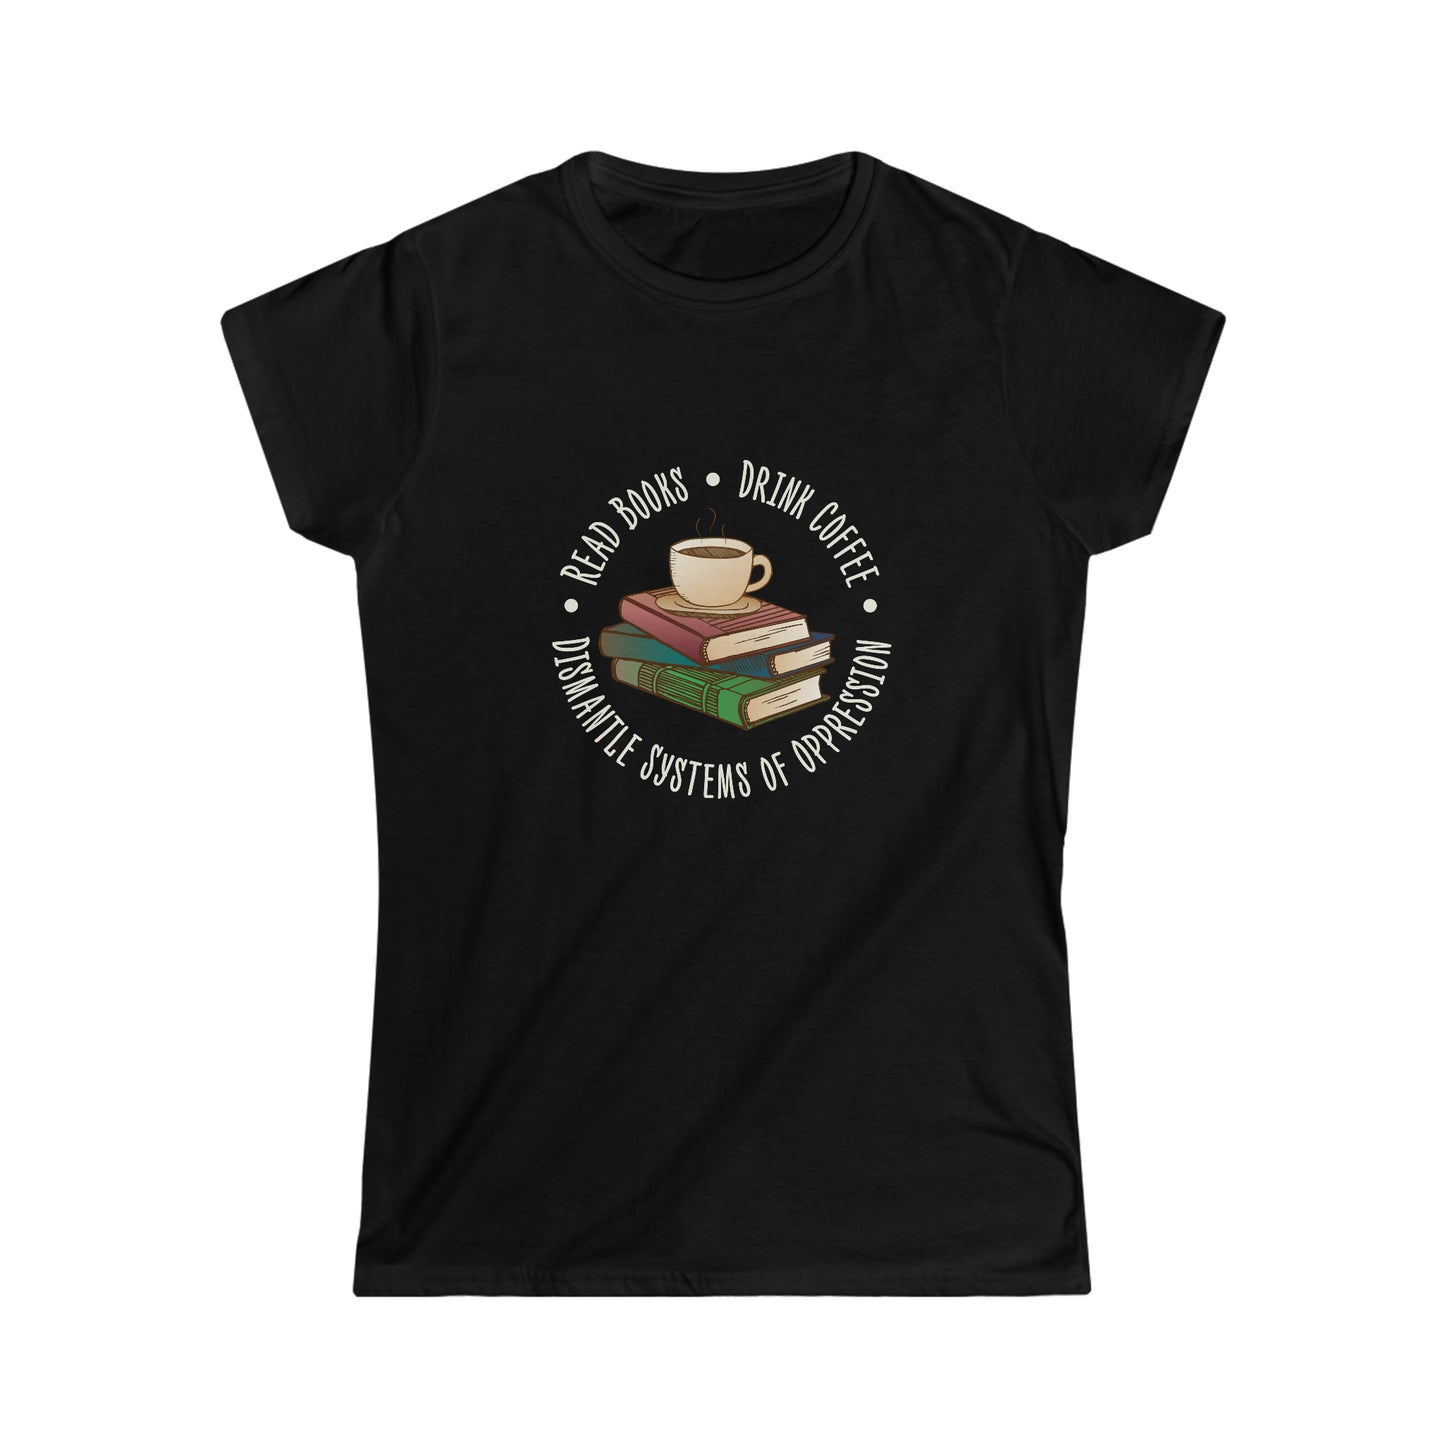 “Dismantle Systems of Oppression” Women’s T-Shirts